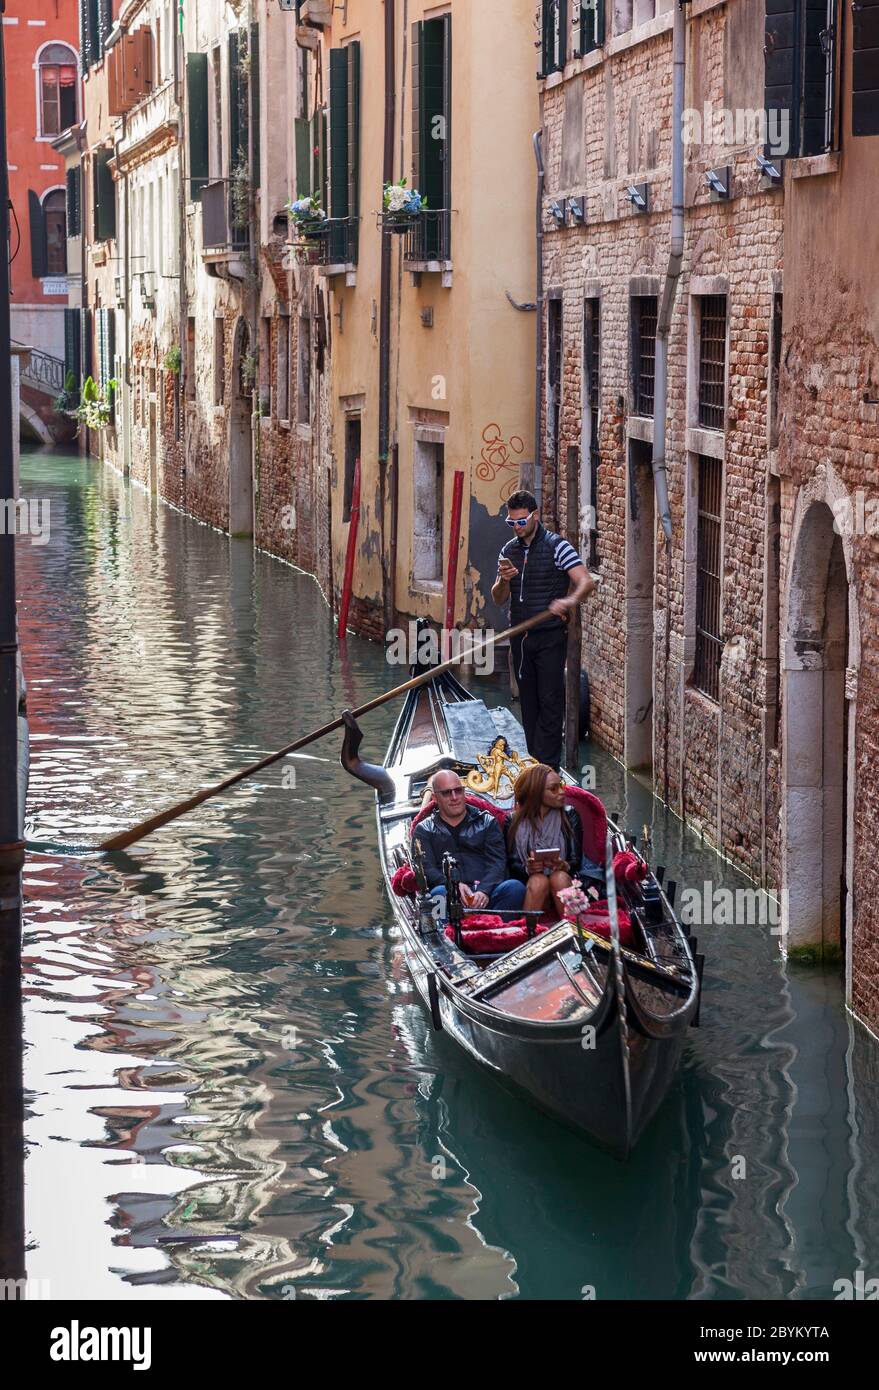 Couple on a gondola trip on the Rio de San Salvador canal in Venice, Italy while the gondolier is distracted using his mobile phone Stock Photo